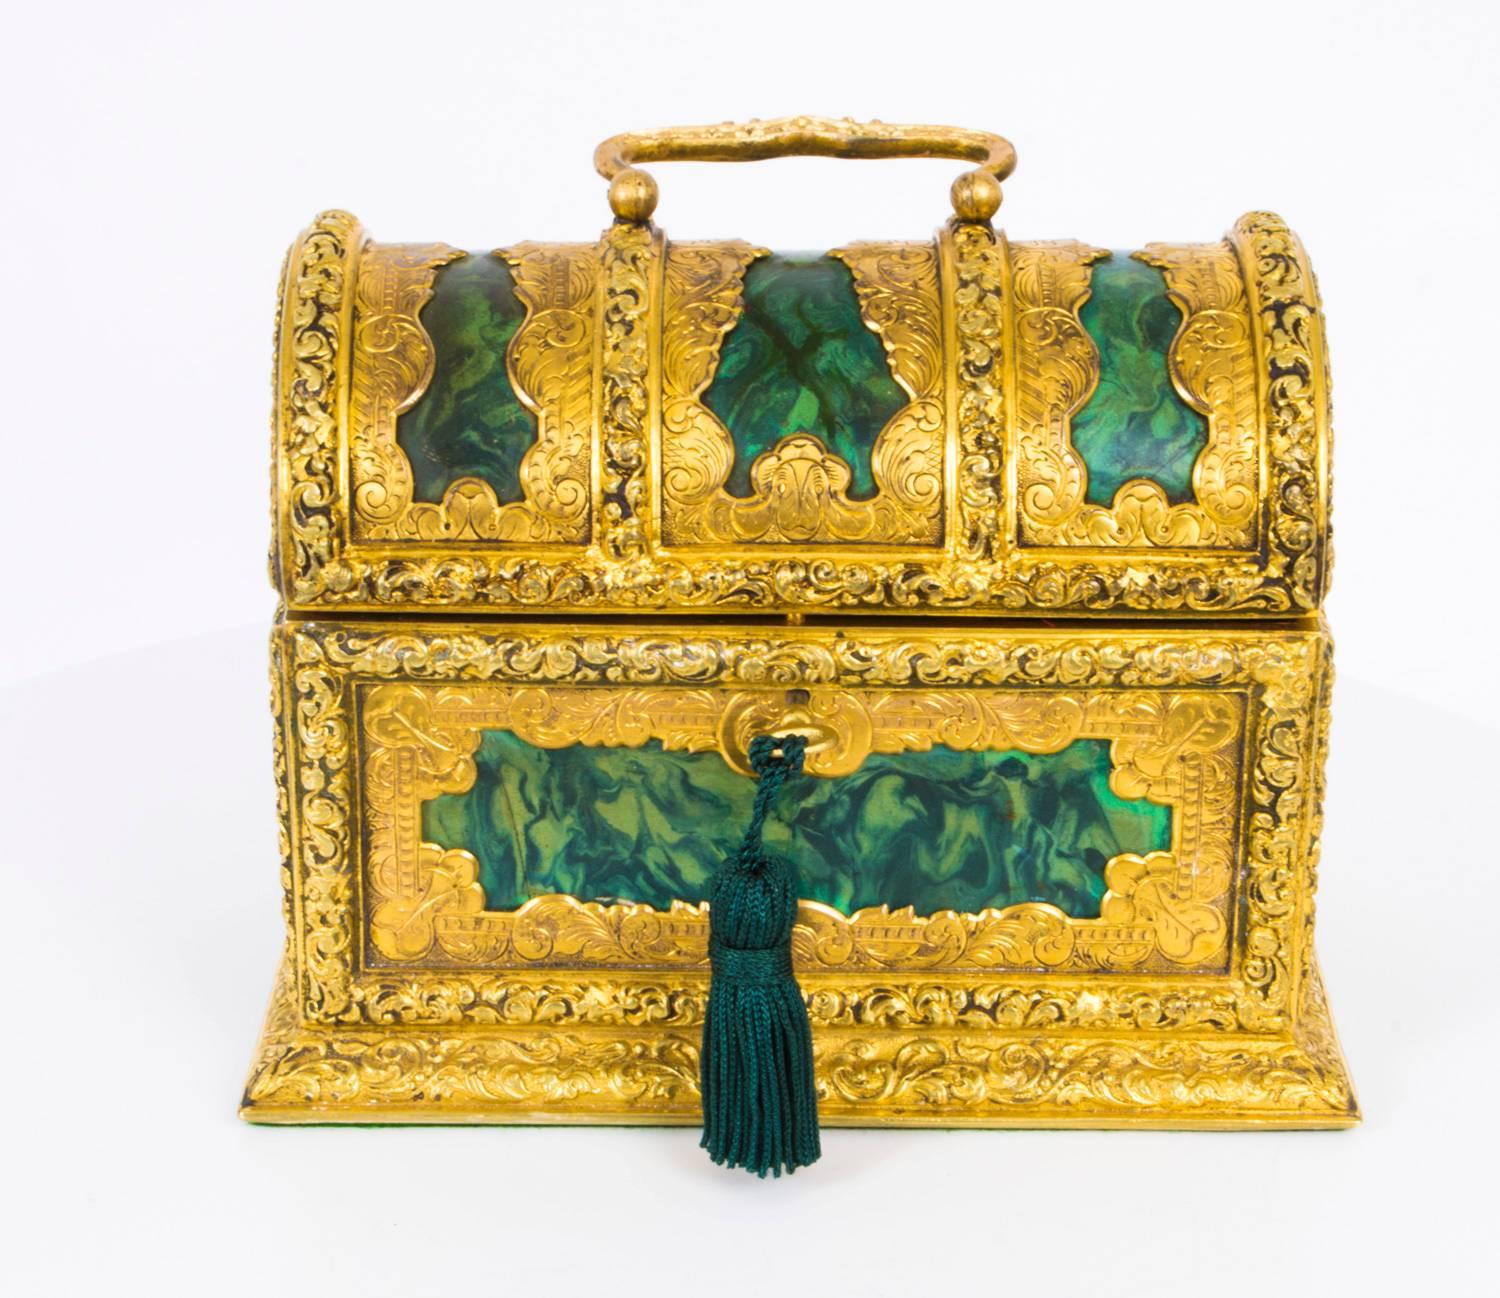 This lovely casket from Asprey London is beautifully decorated with faux malachite inlay and gilded ormolu, circa 1870 in date. The interior is lined with the original burgundy velvet and is ready to store your precious items.

It is a lovely